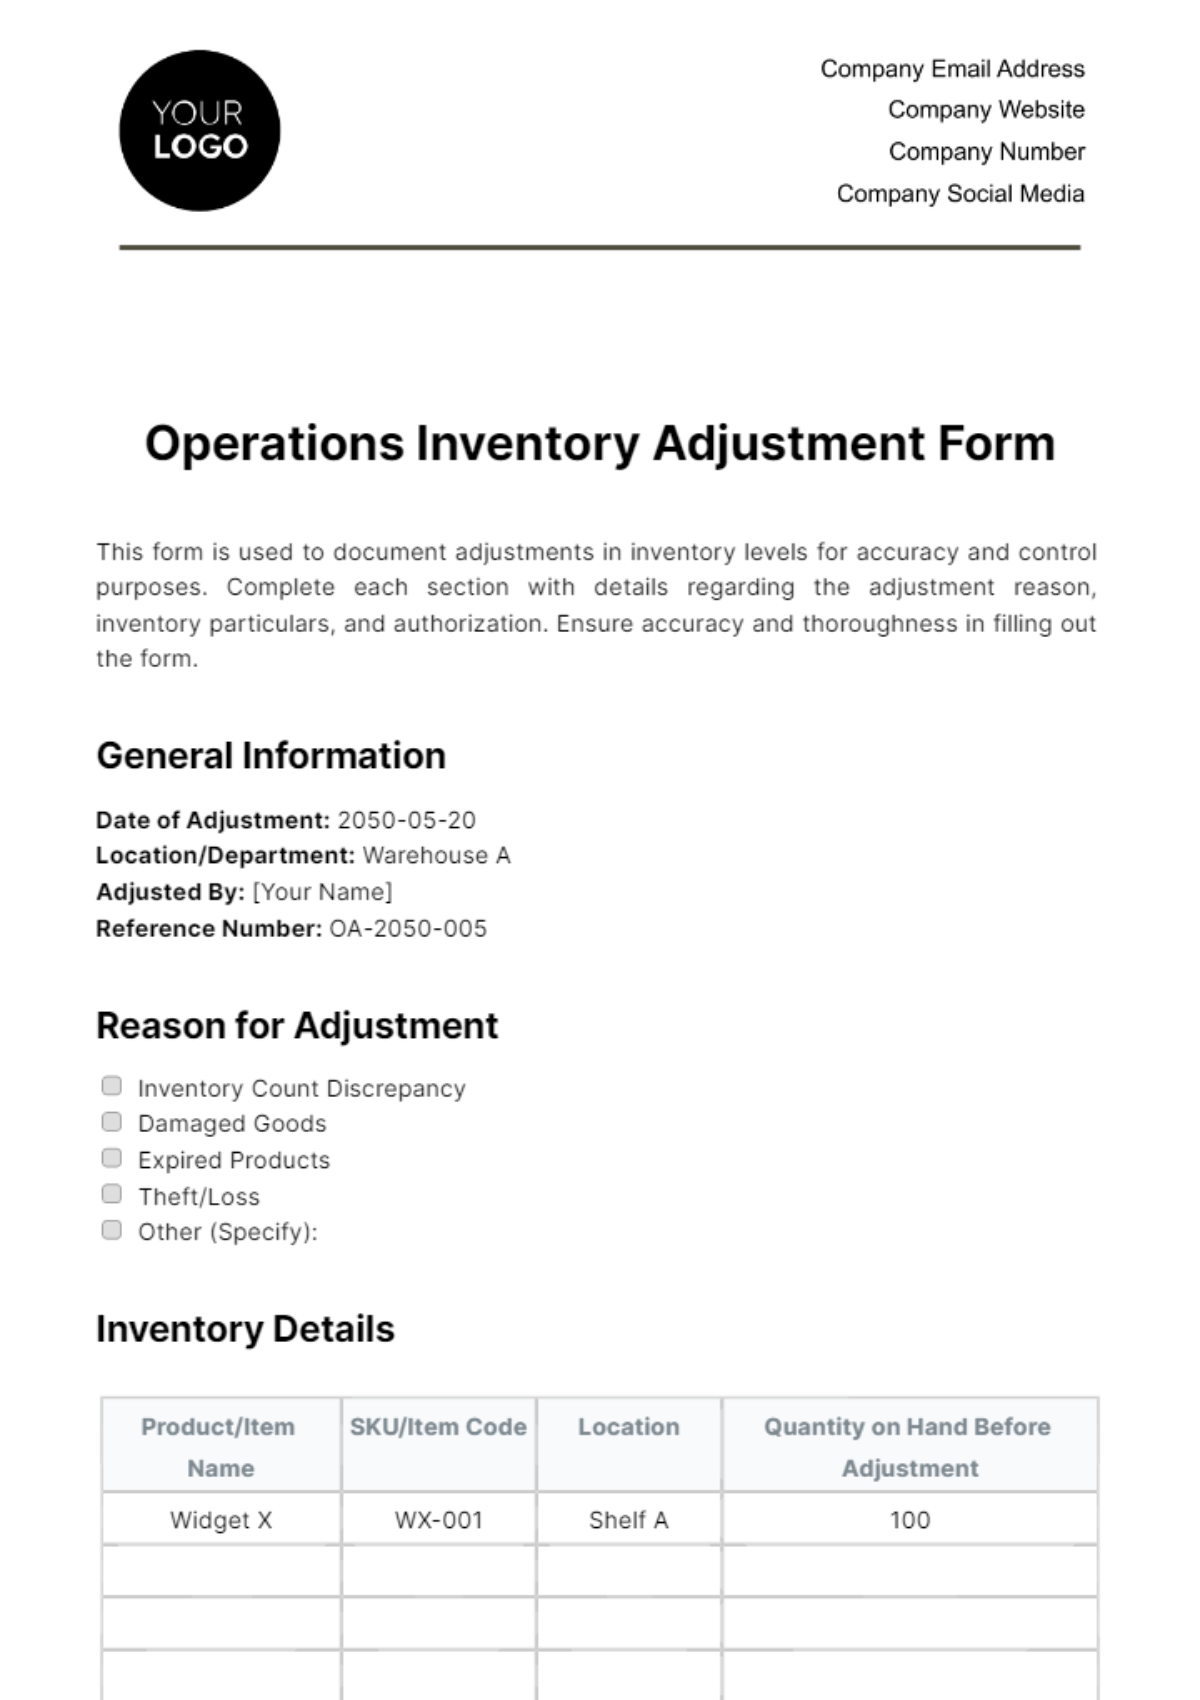 Operations Inventory Adjustment Form Template